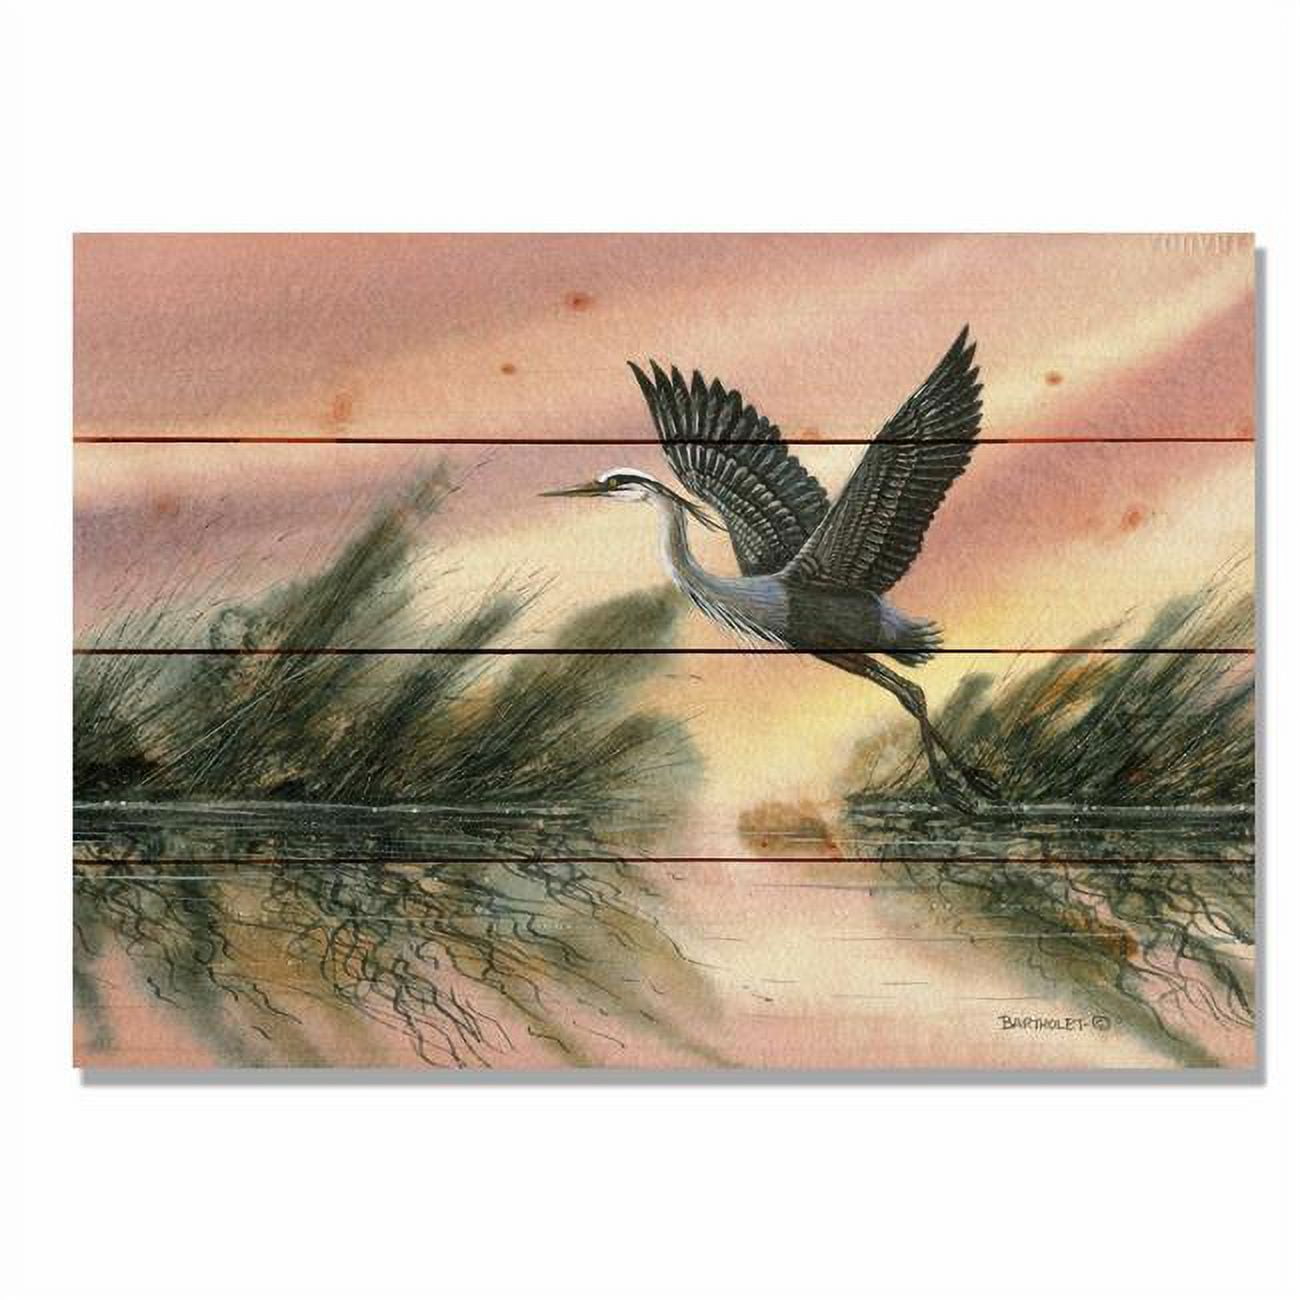 Day Dream Dbcm2014 20 X 14 In. Bartholets Cool Of The Morning Wall Art